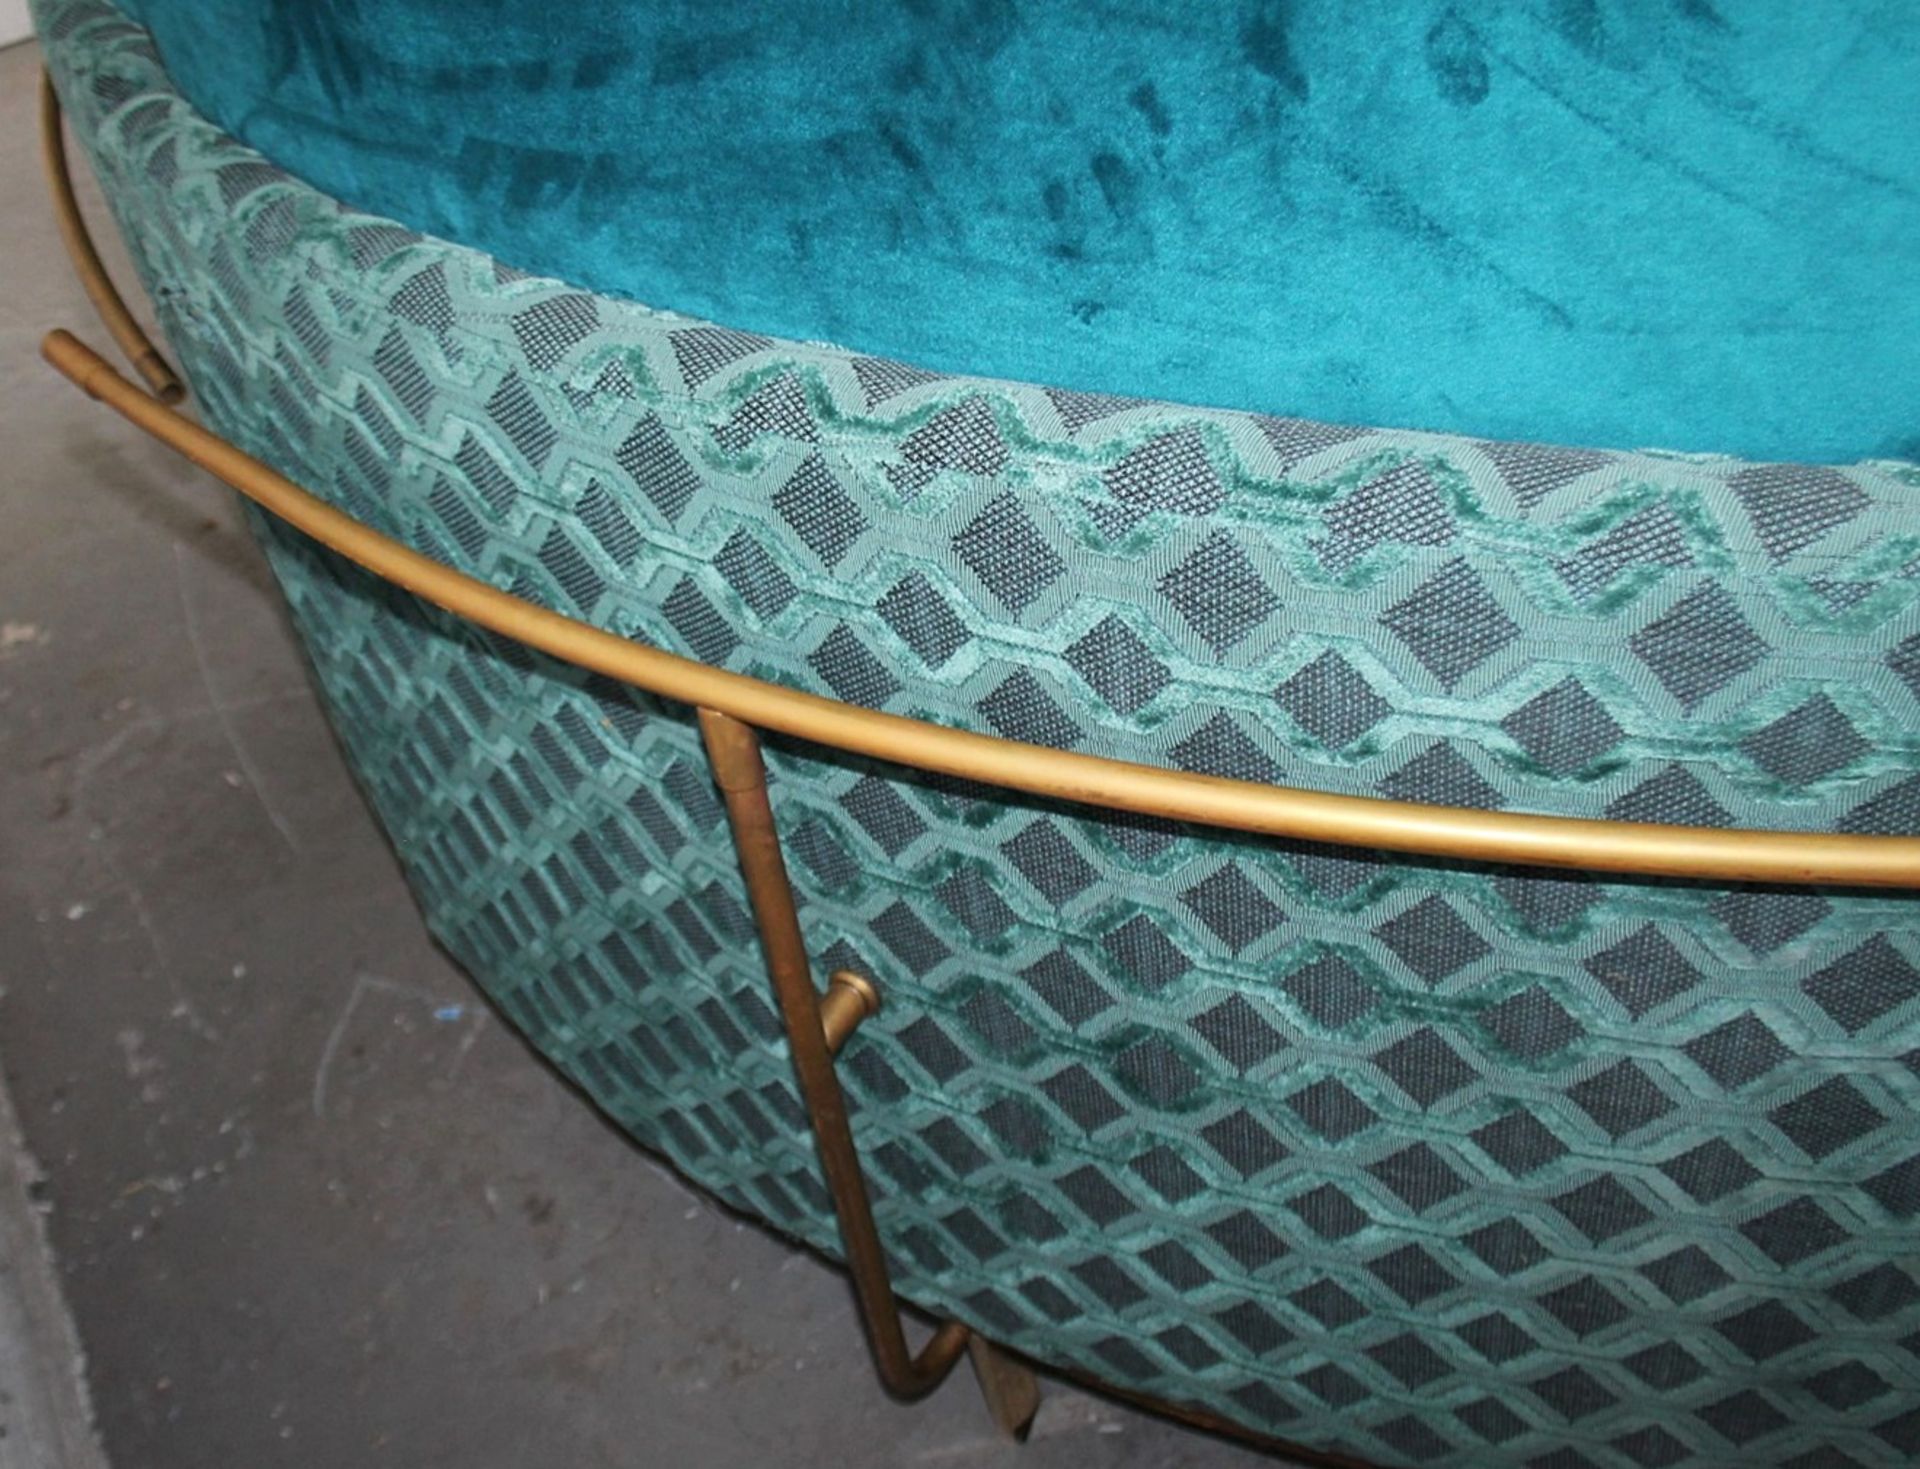 1 x Bespoke Commercial Curved C-Shaped Booth Seating Upholstered In Premium Teal Coloured Fabrics - - Image 11 of 17